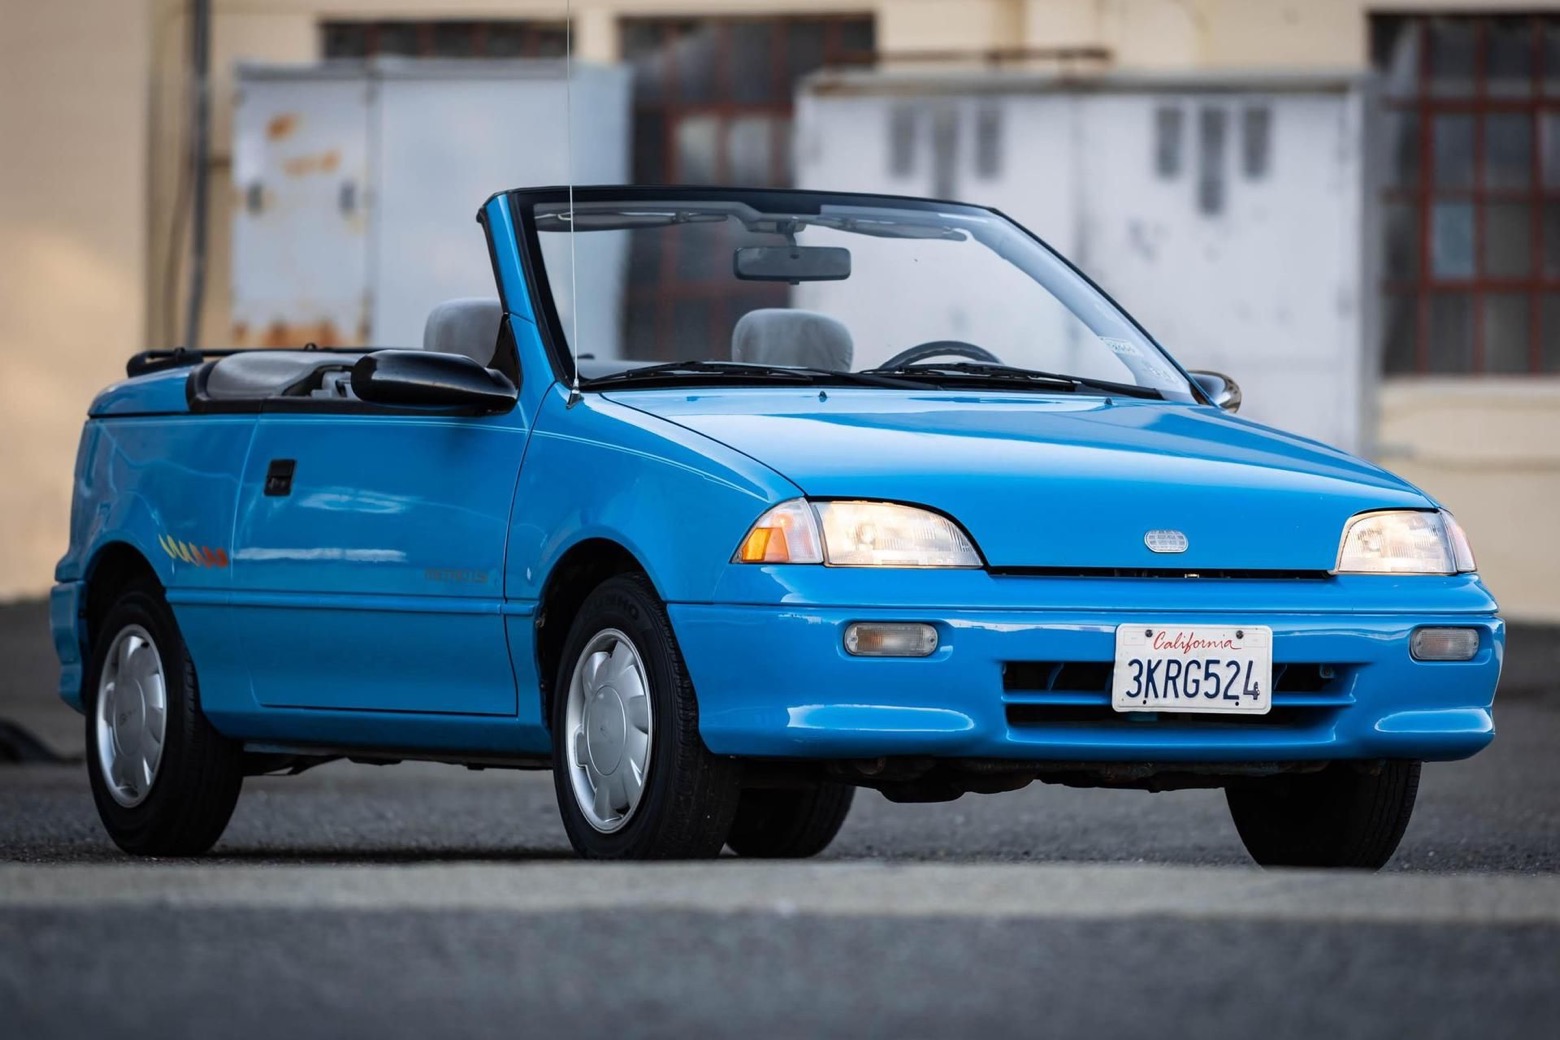 The Geo Metro Convertible Is A Laughably Mediocre Car From The '80s |  Carscoops